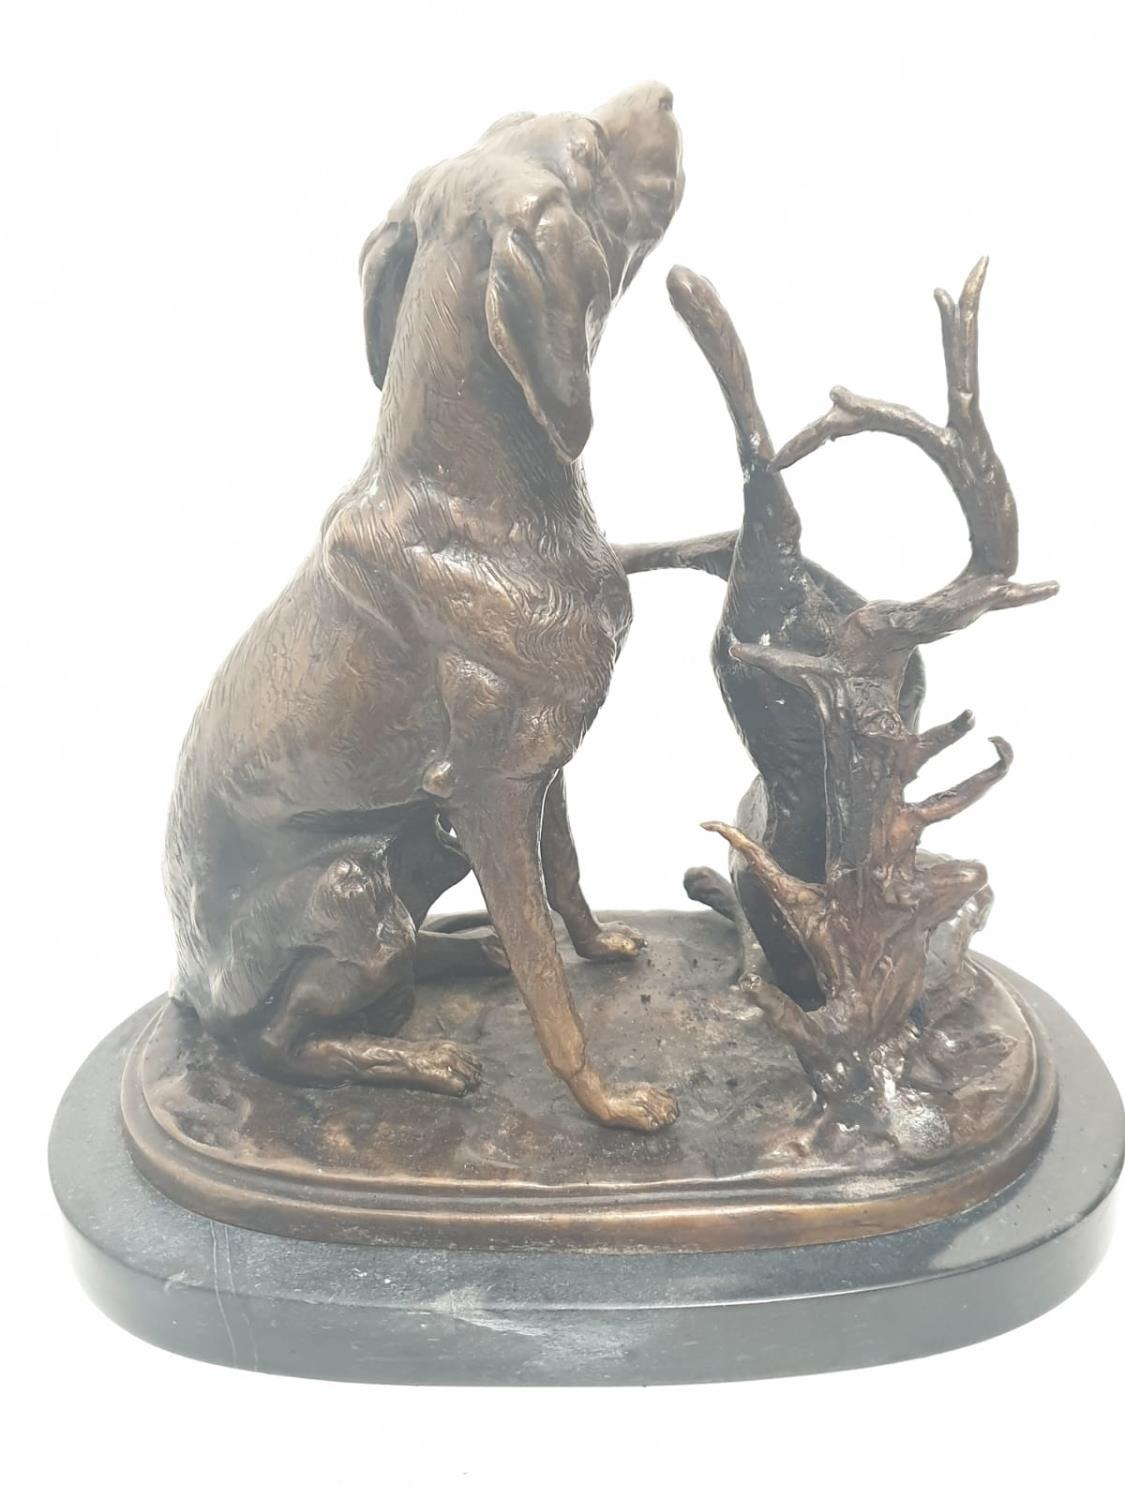 A vintage bronze sculpture of a hunting dog and an unlucky rabbit. 25 x 25 cm. - Image 5 of 6